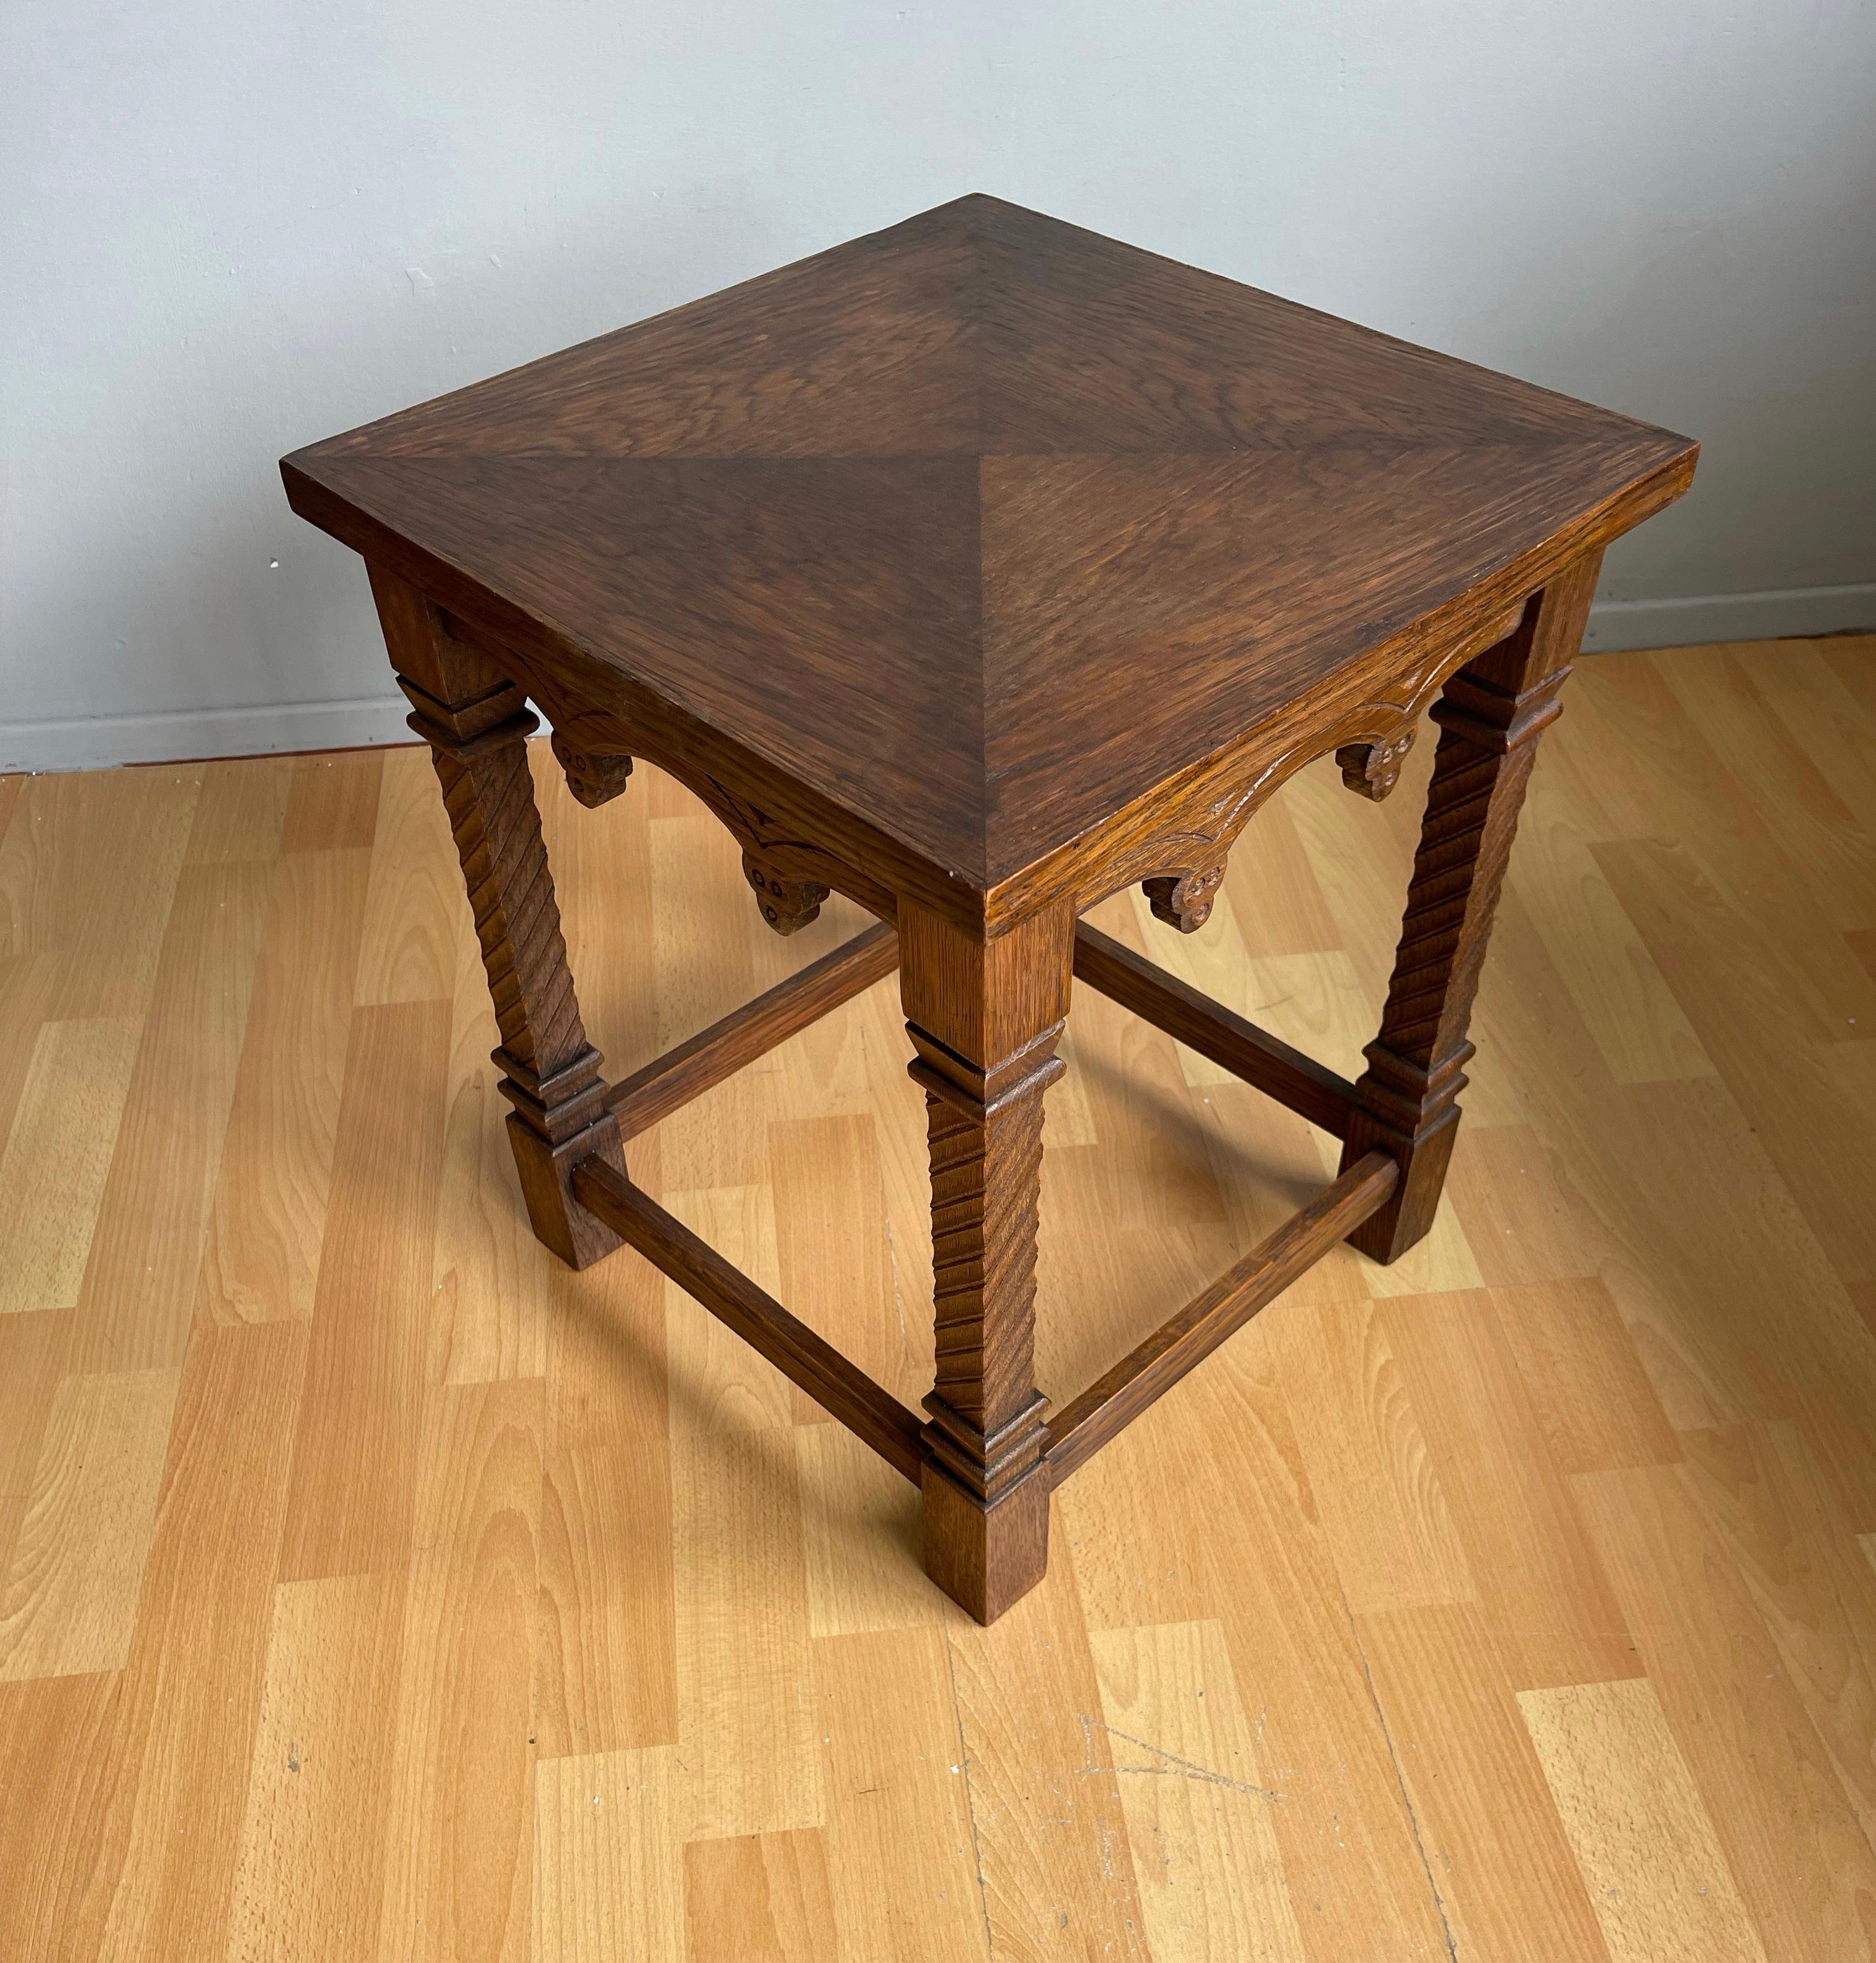 Practical size and ready to use, early twentieth century Gothic table.

If you are looking for a practical size and excellent condition table to grace your living space then this unique Gothic specimen could be flying your way soon. All handcrafted